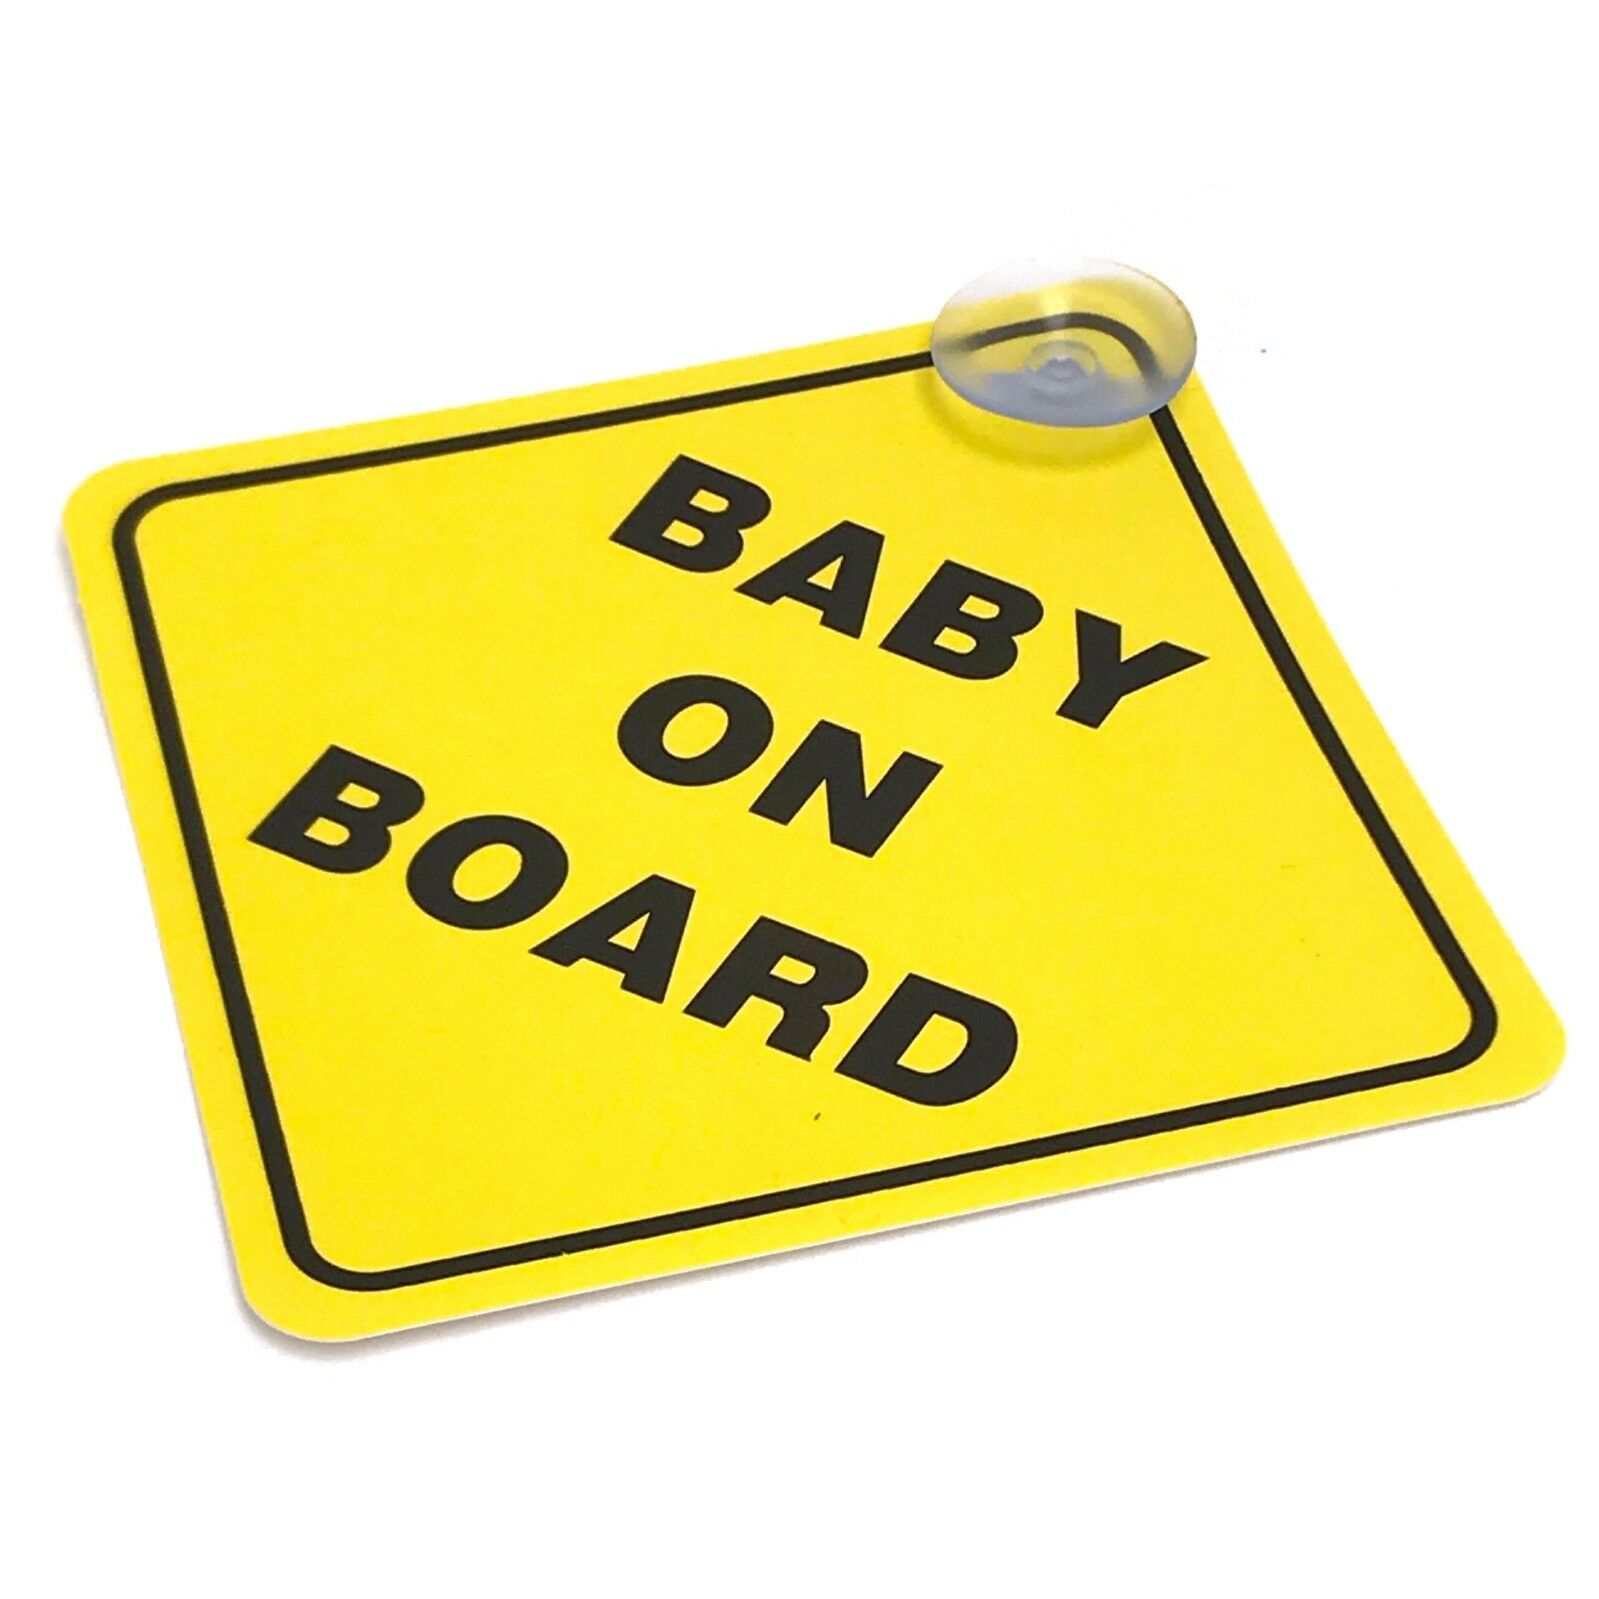 2 Or 1 Baby On Board Safety Car Window Suction Cup Yellow Reflective Sign 5x5"